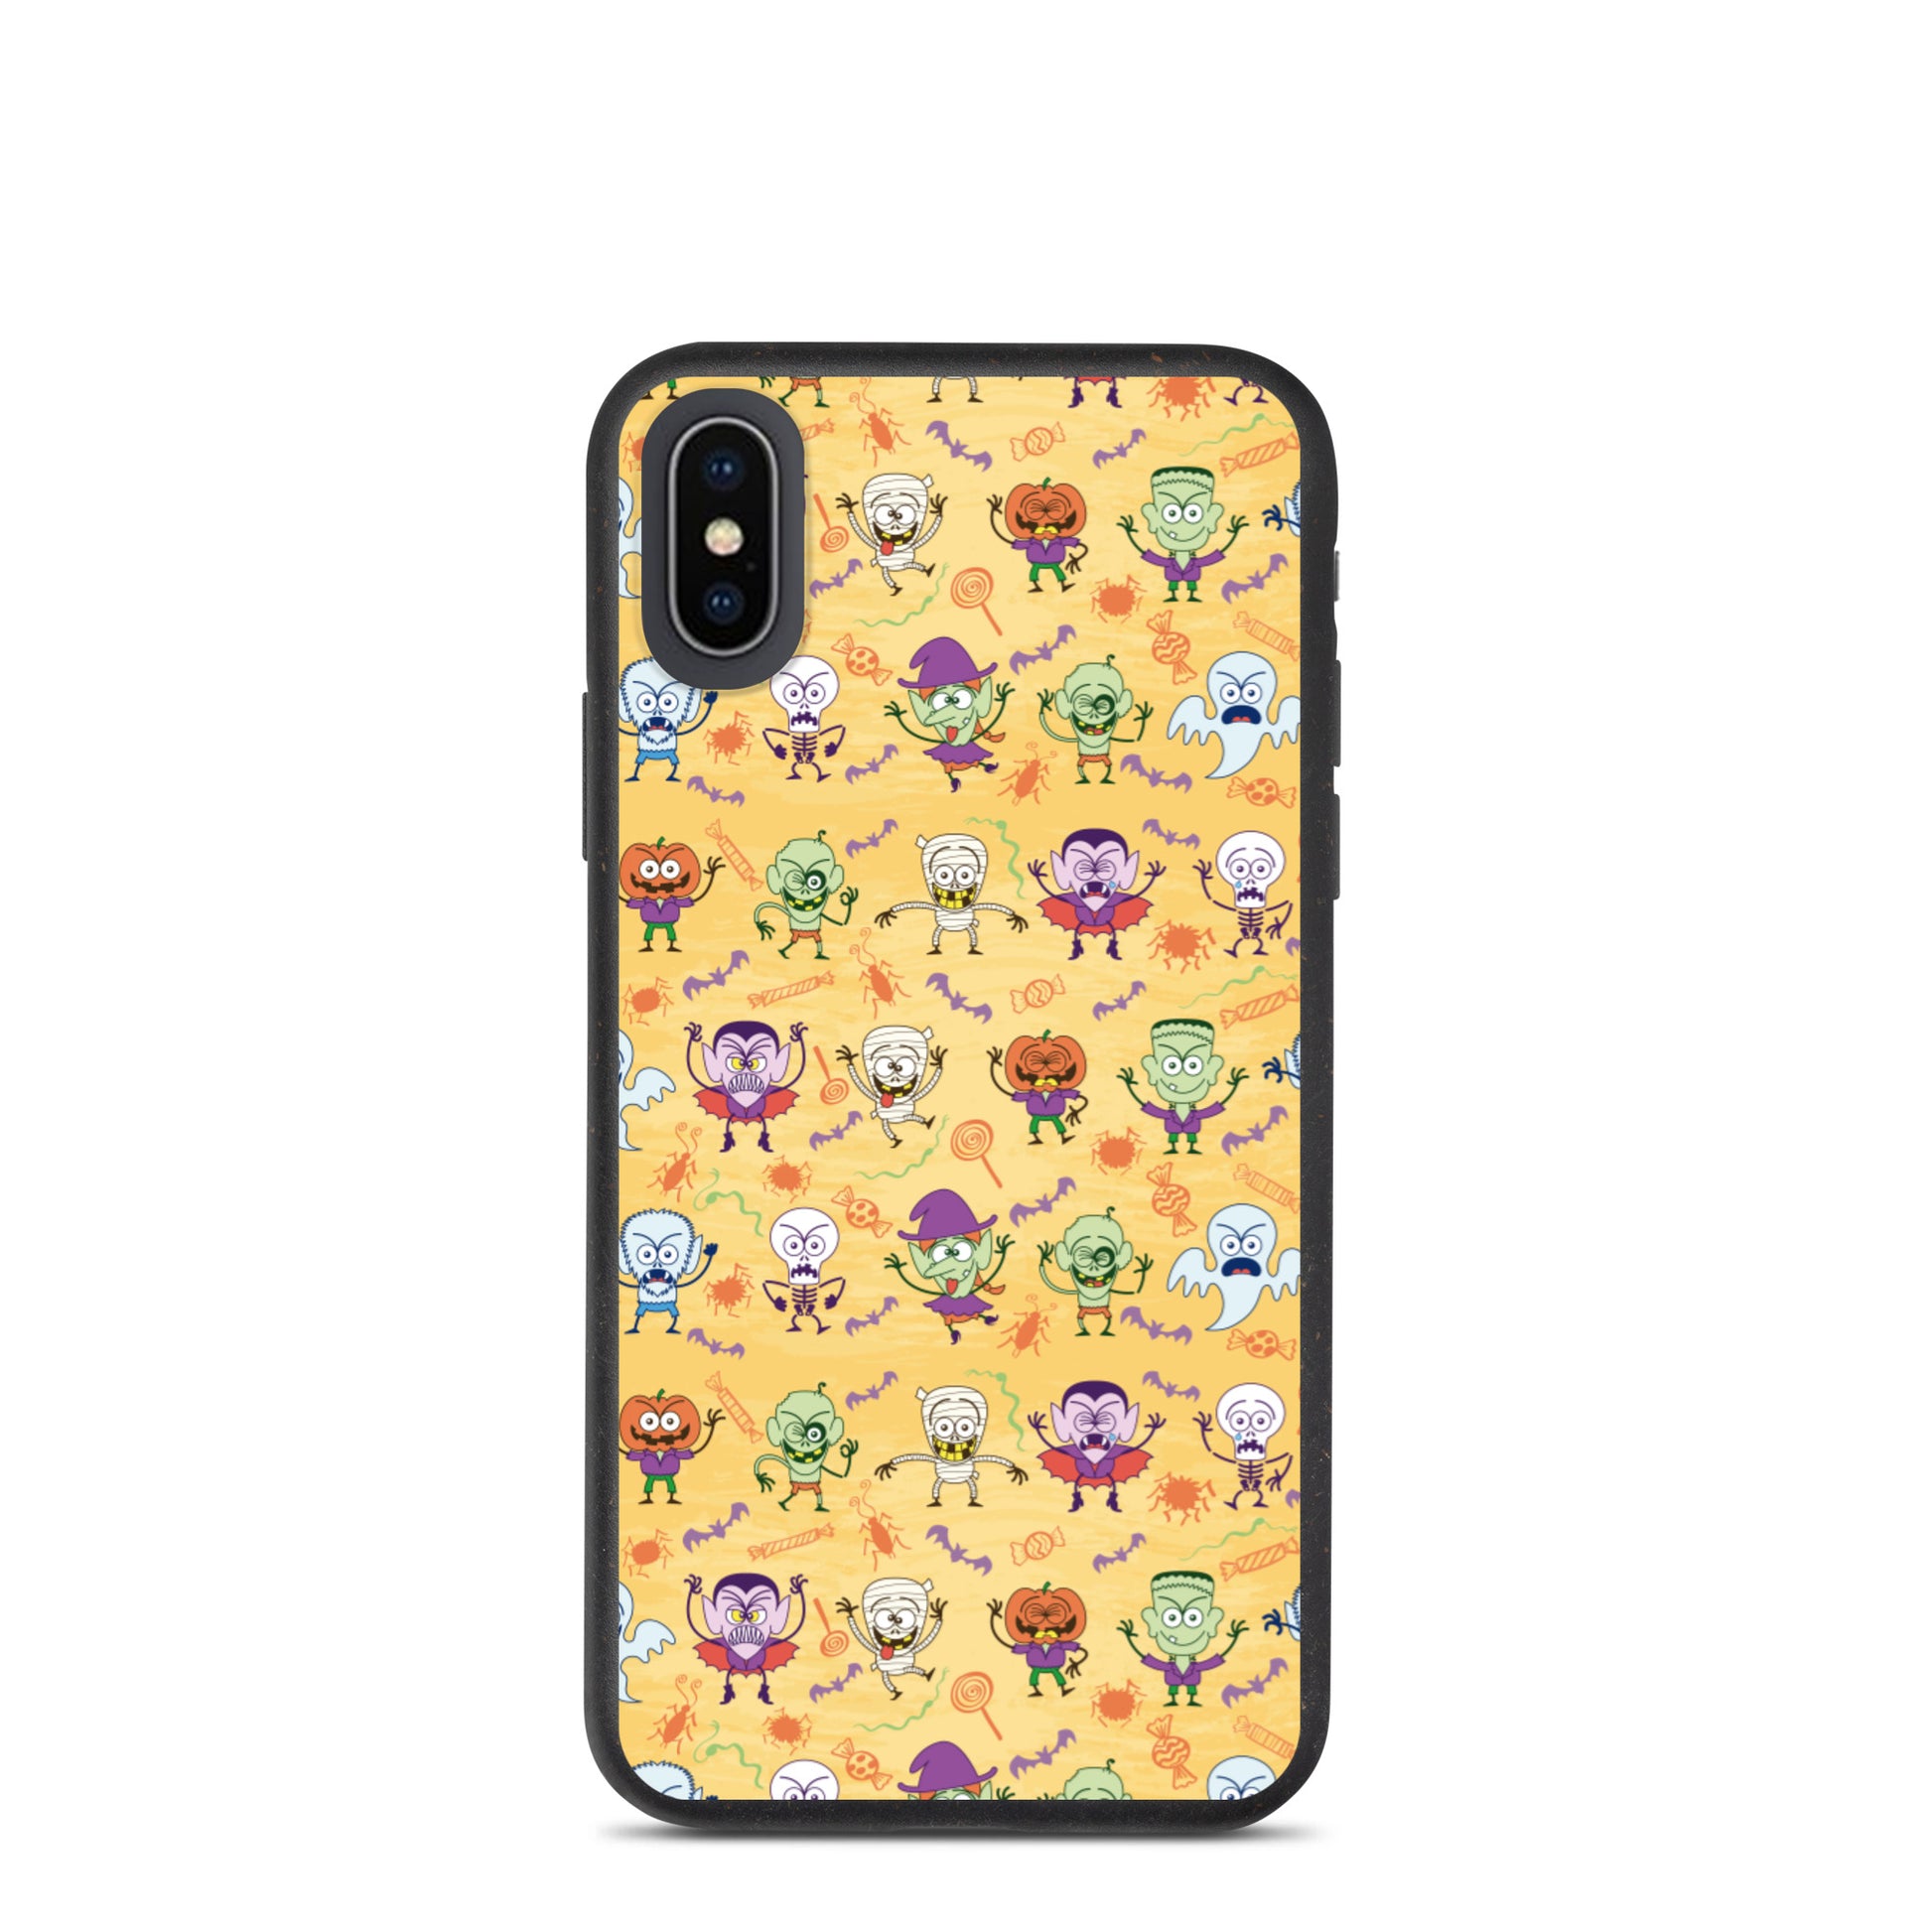 Halloween characters making funny faces Speckled iPhone case. IPhone X, XS